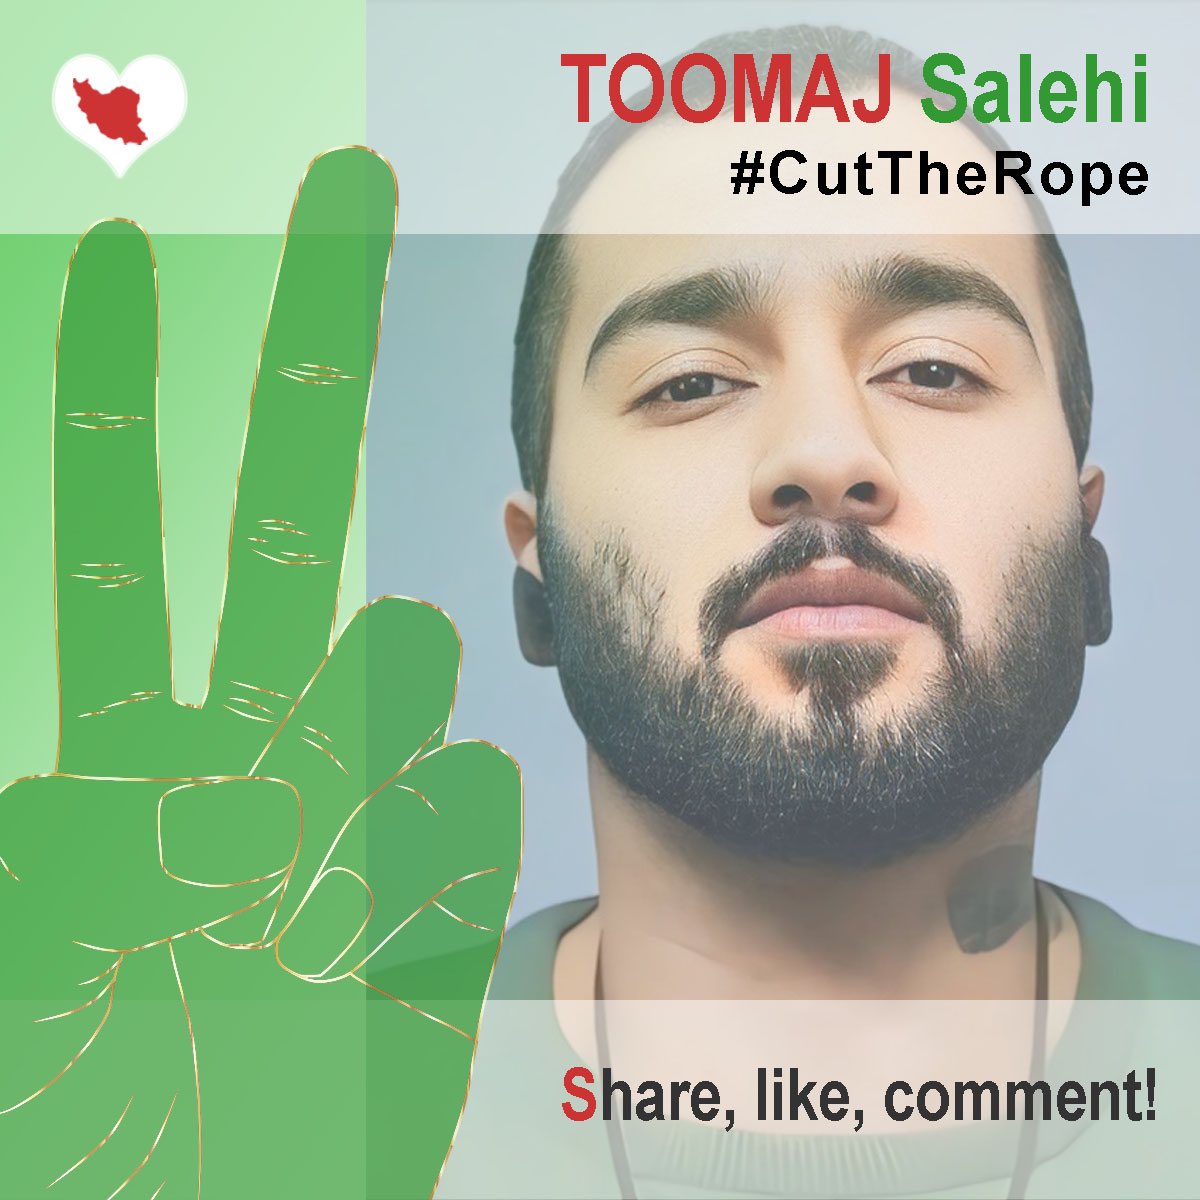 Iranian Rapper Toomaj Salehi Sentenced to Death for Songs Critical of Government ,Be his voice
#FreeToomaj‌
#ToomajSalehi 
#CutTheRope
#FreeSpech 
#IranRevoIution 
#OpIran 
#Anonymous